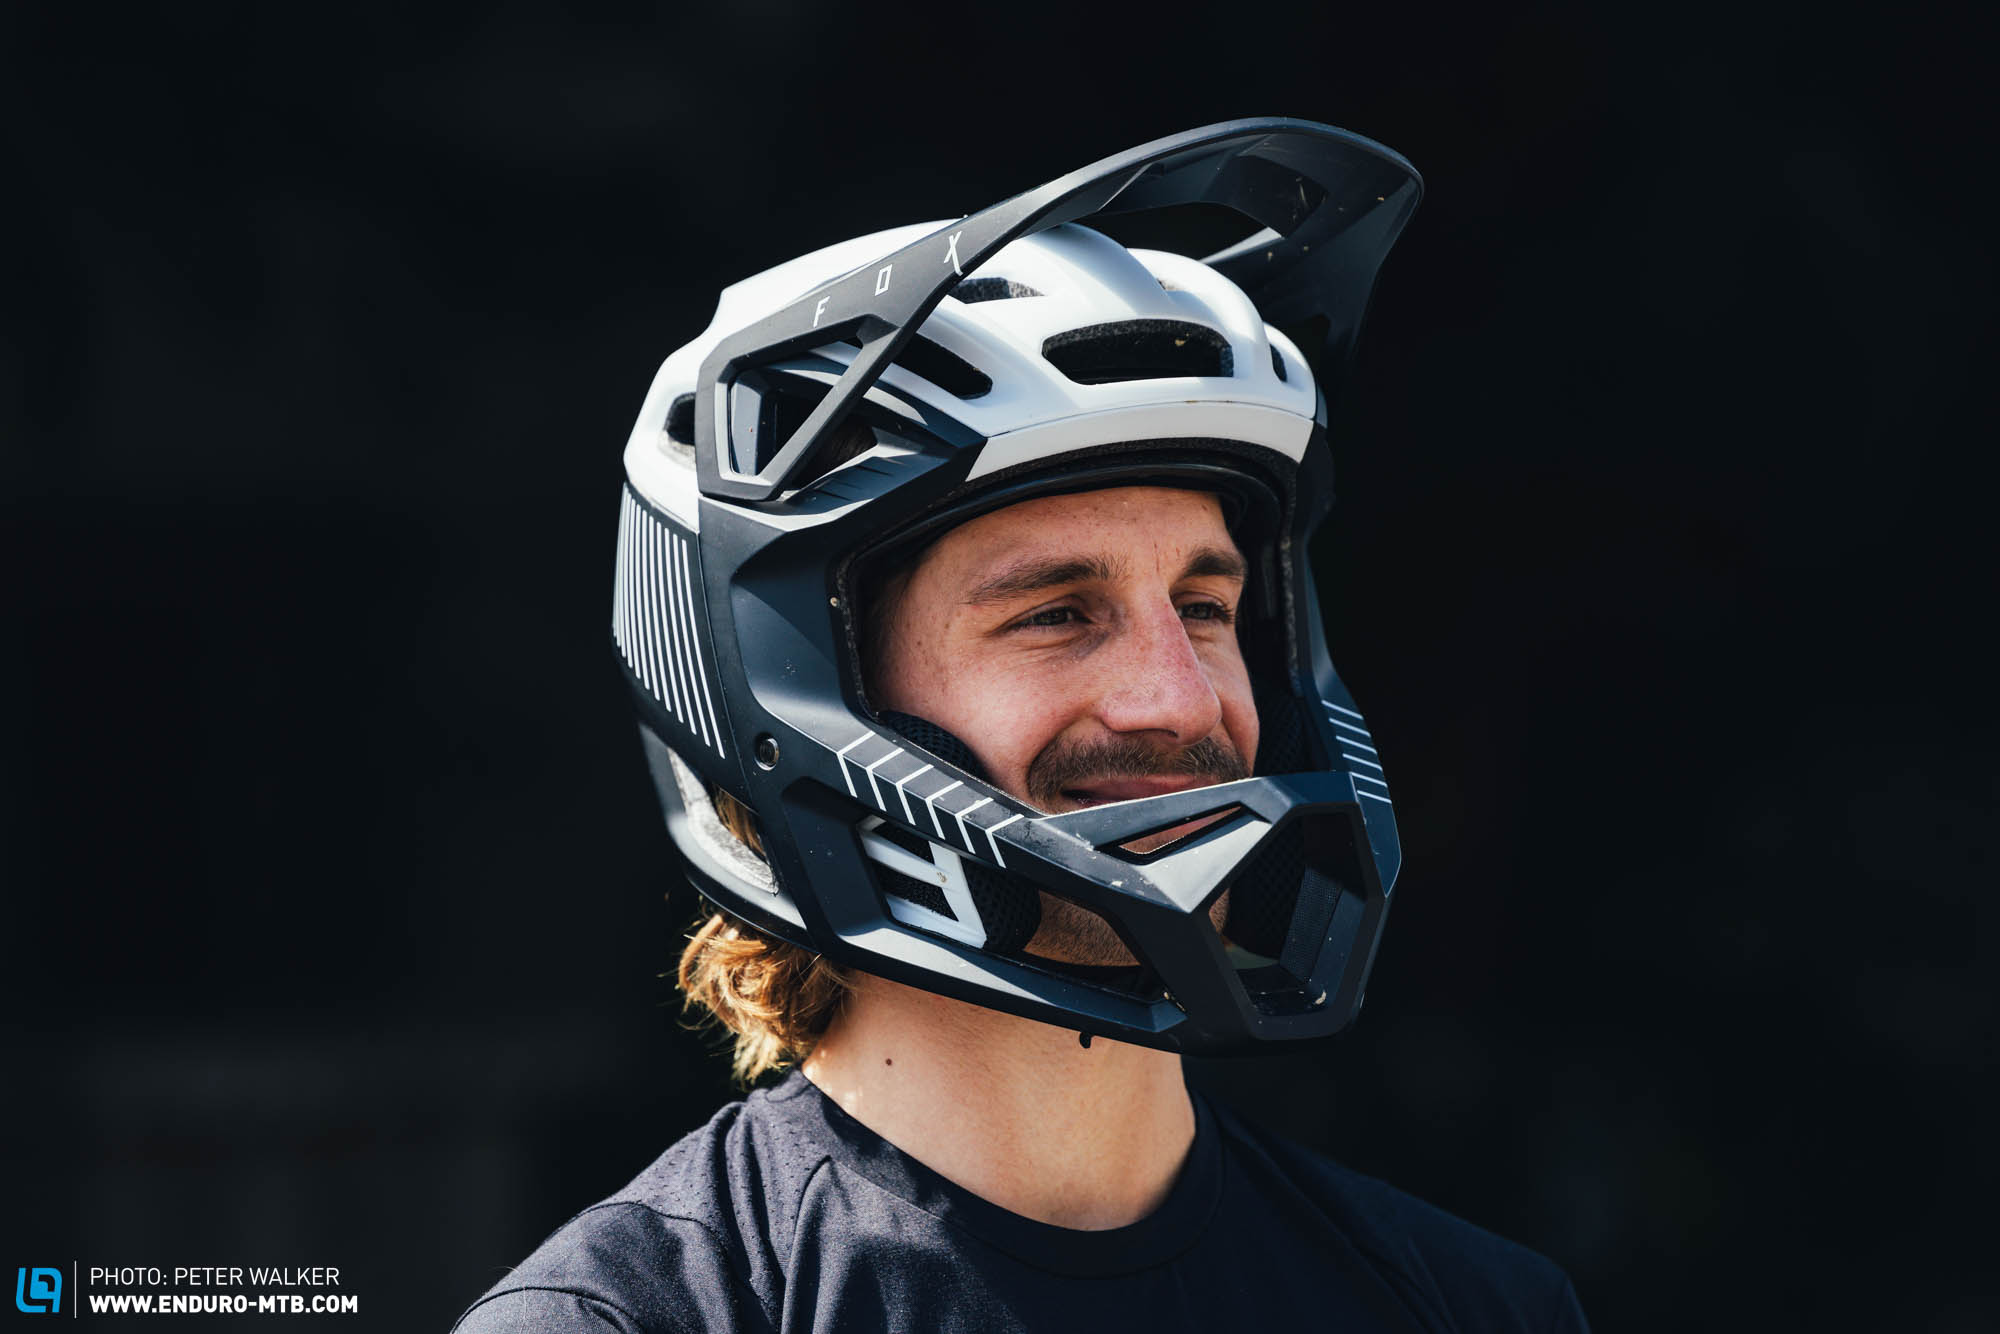 Fox Proframe RS – In our 2023 light and convertible full-face helmet comparison test